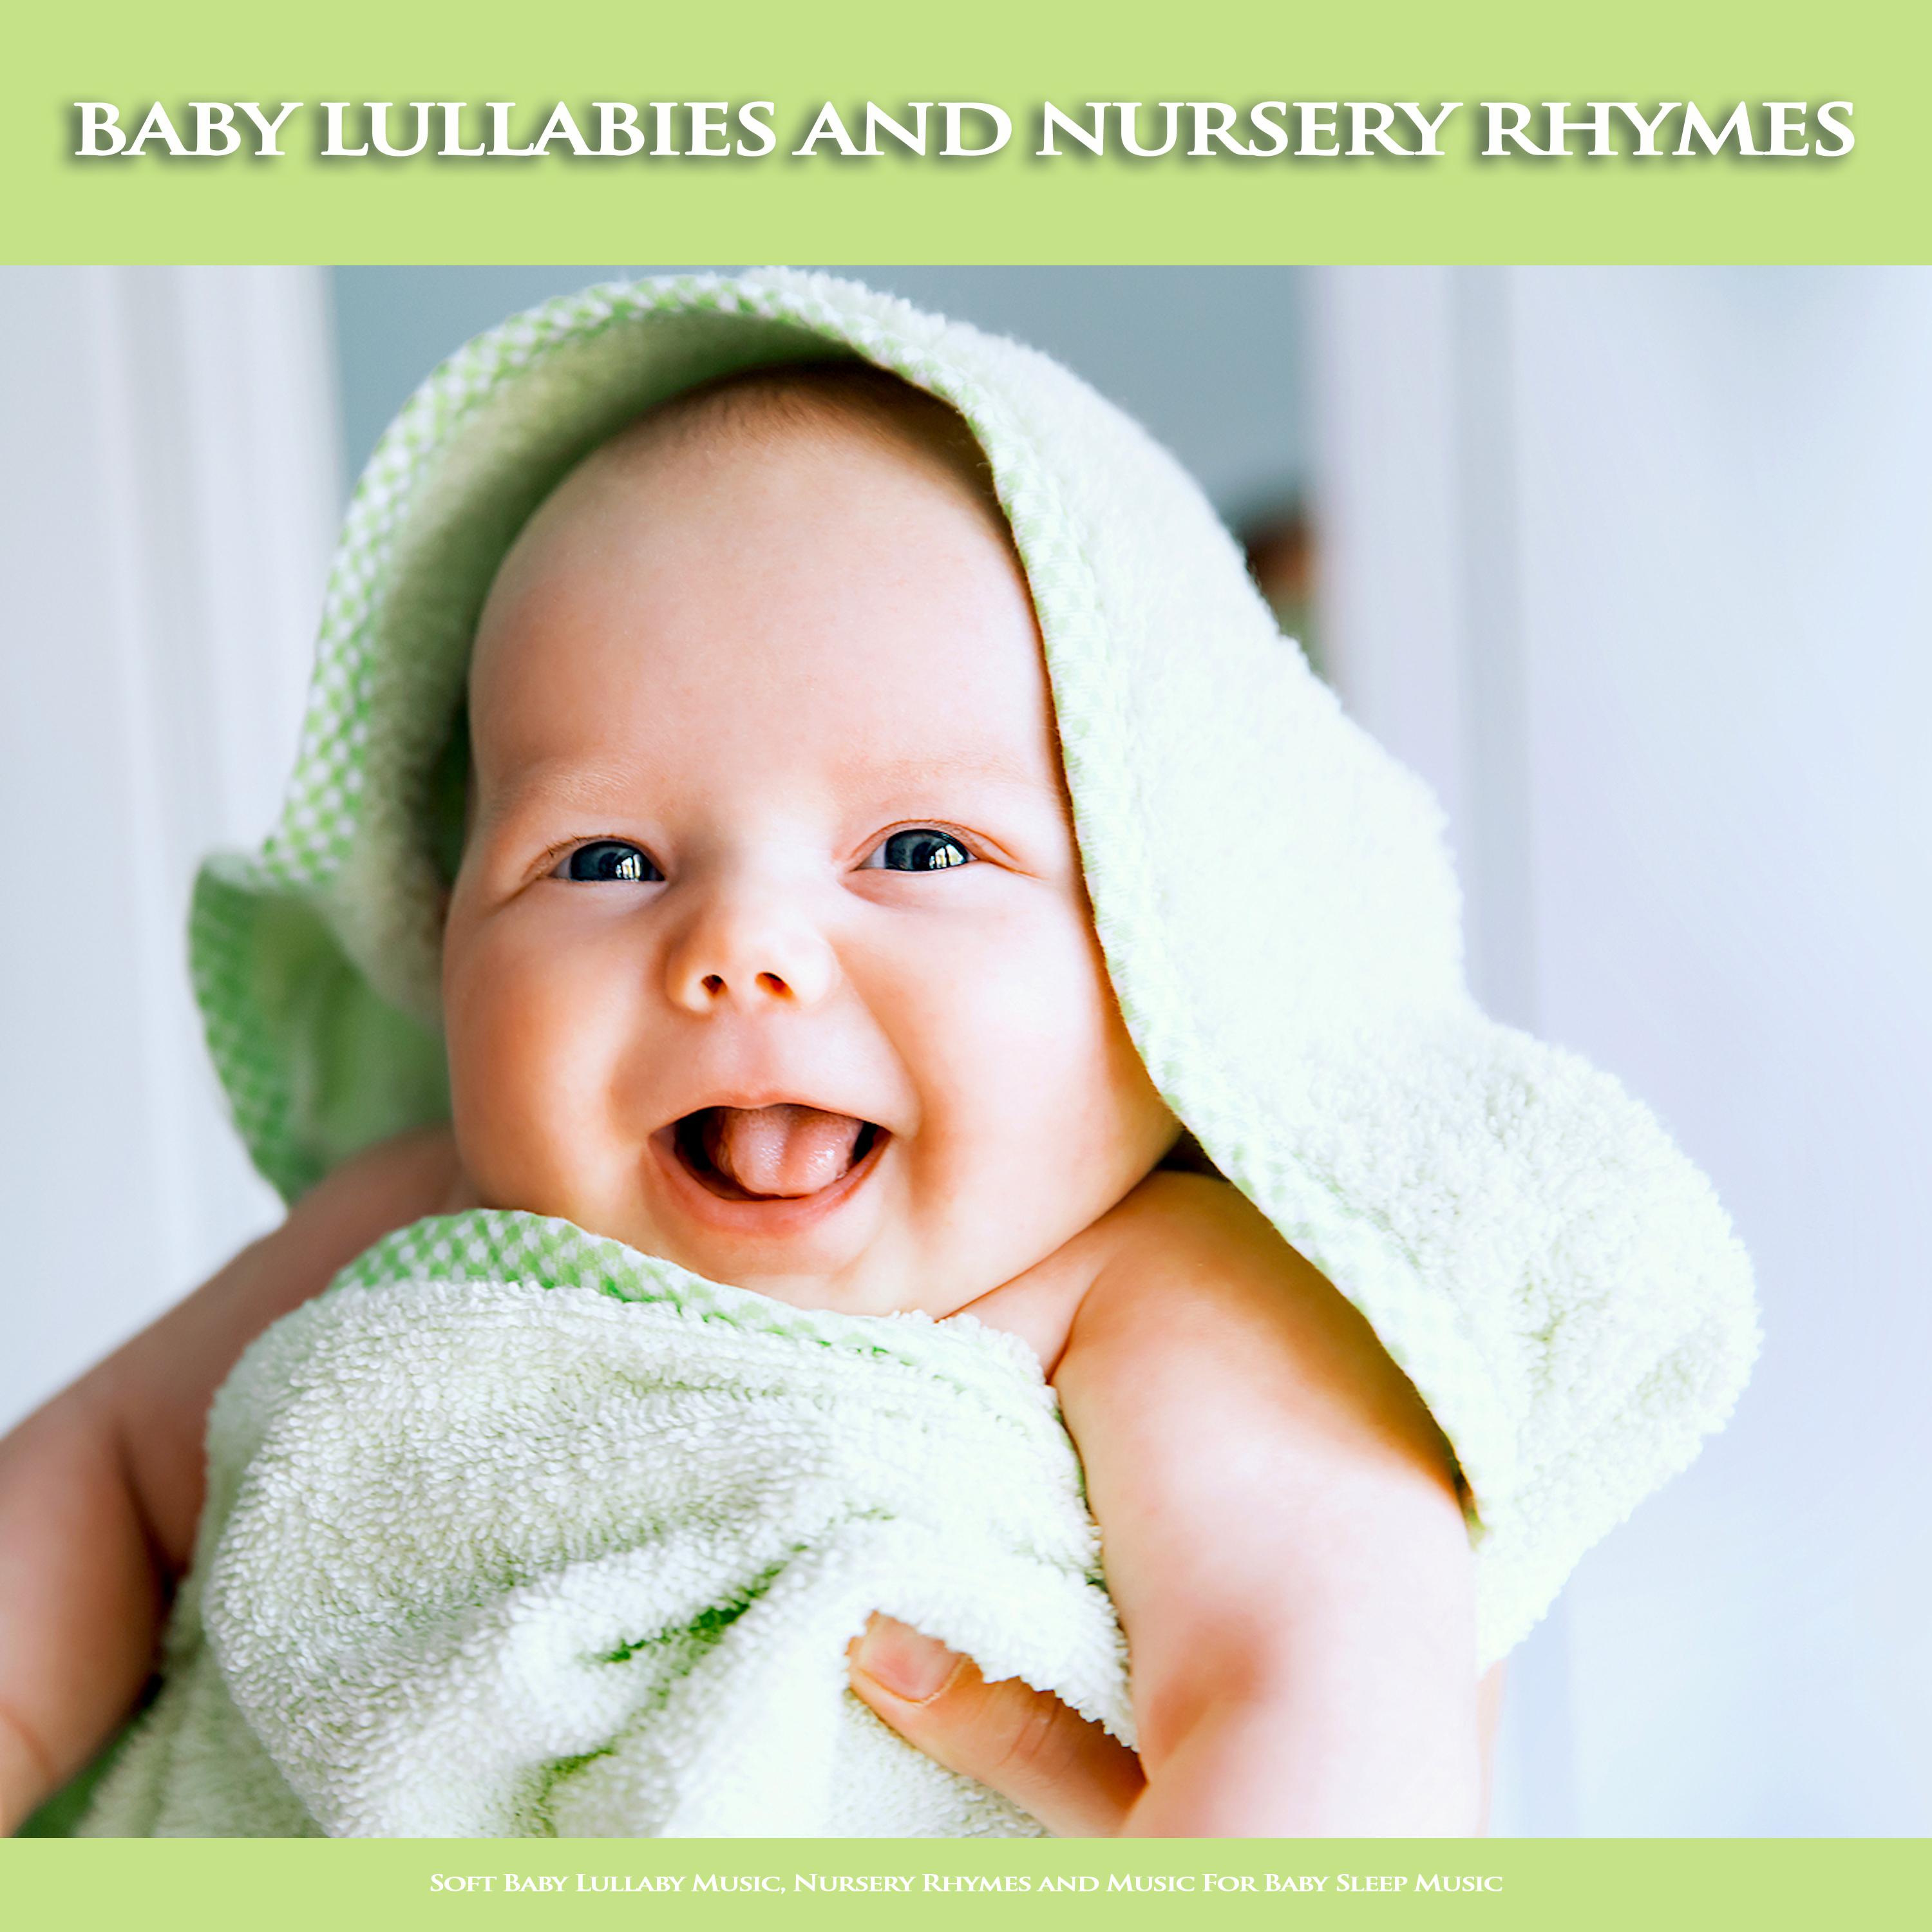 Baby Lullabies and Nursery Rhymes: Soft Baby Lullaby Music, Nursery Rhymes and Music For Baby Sleep Music